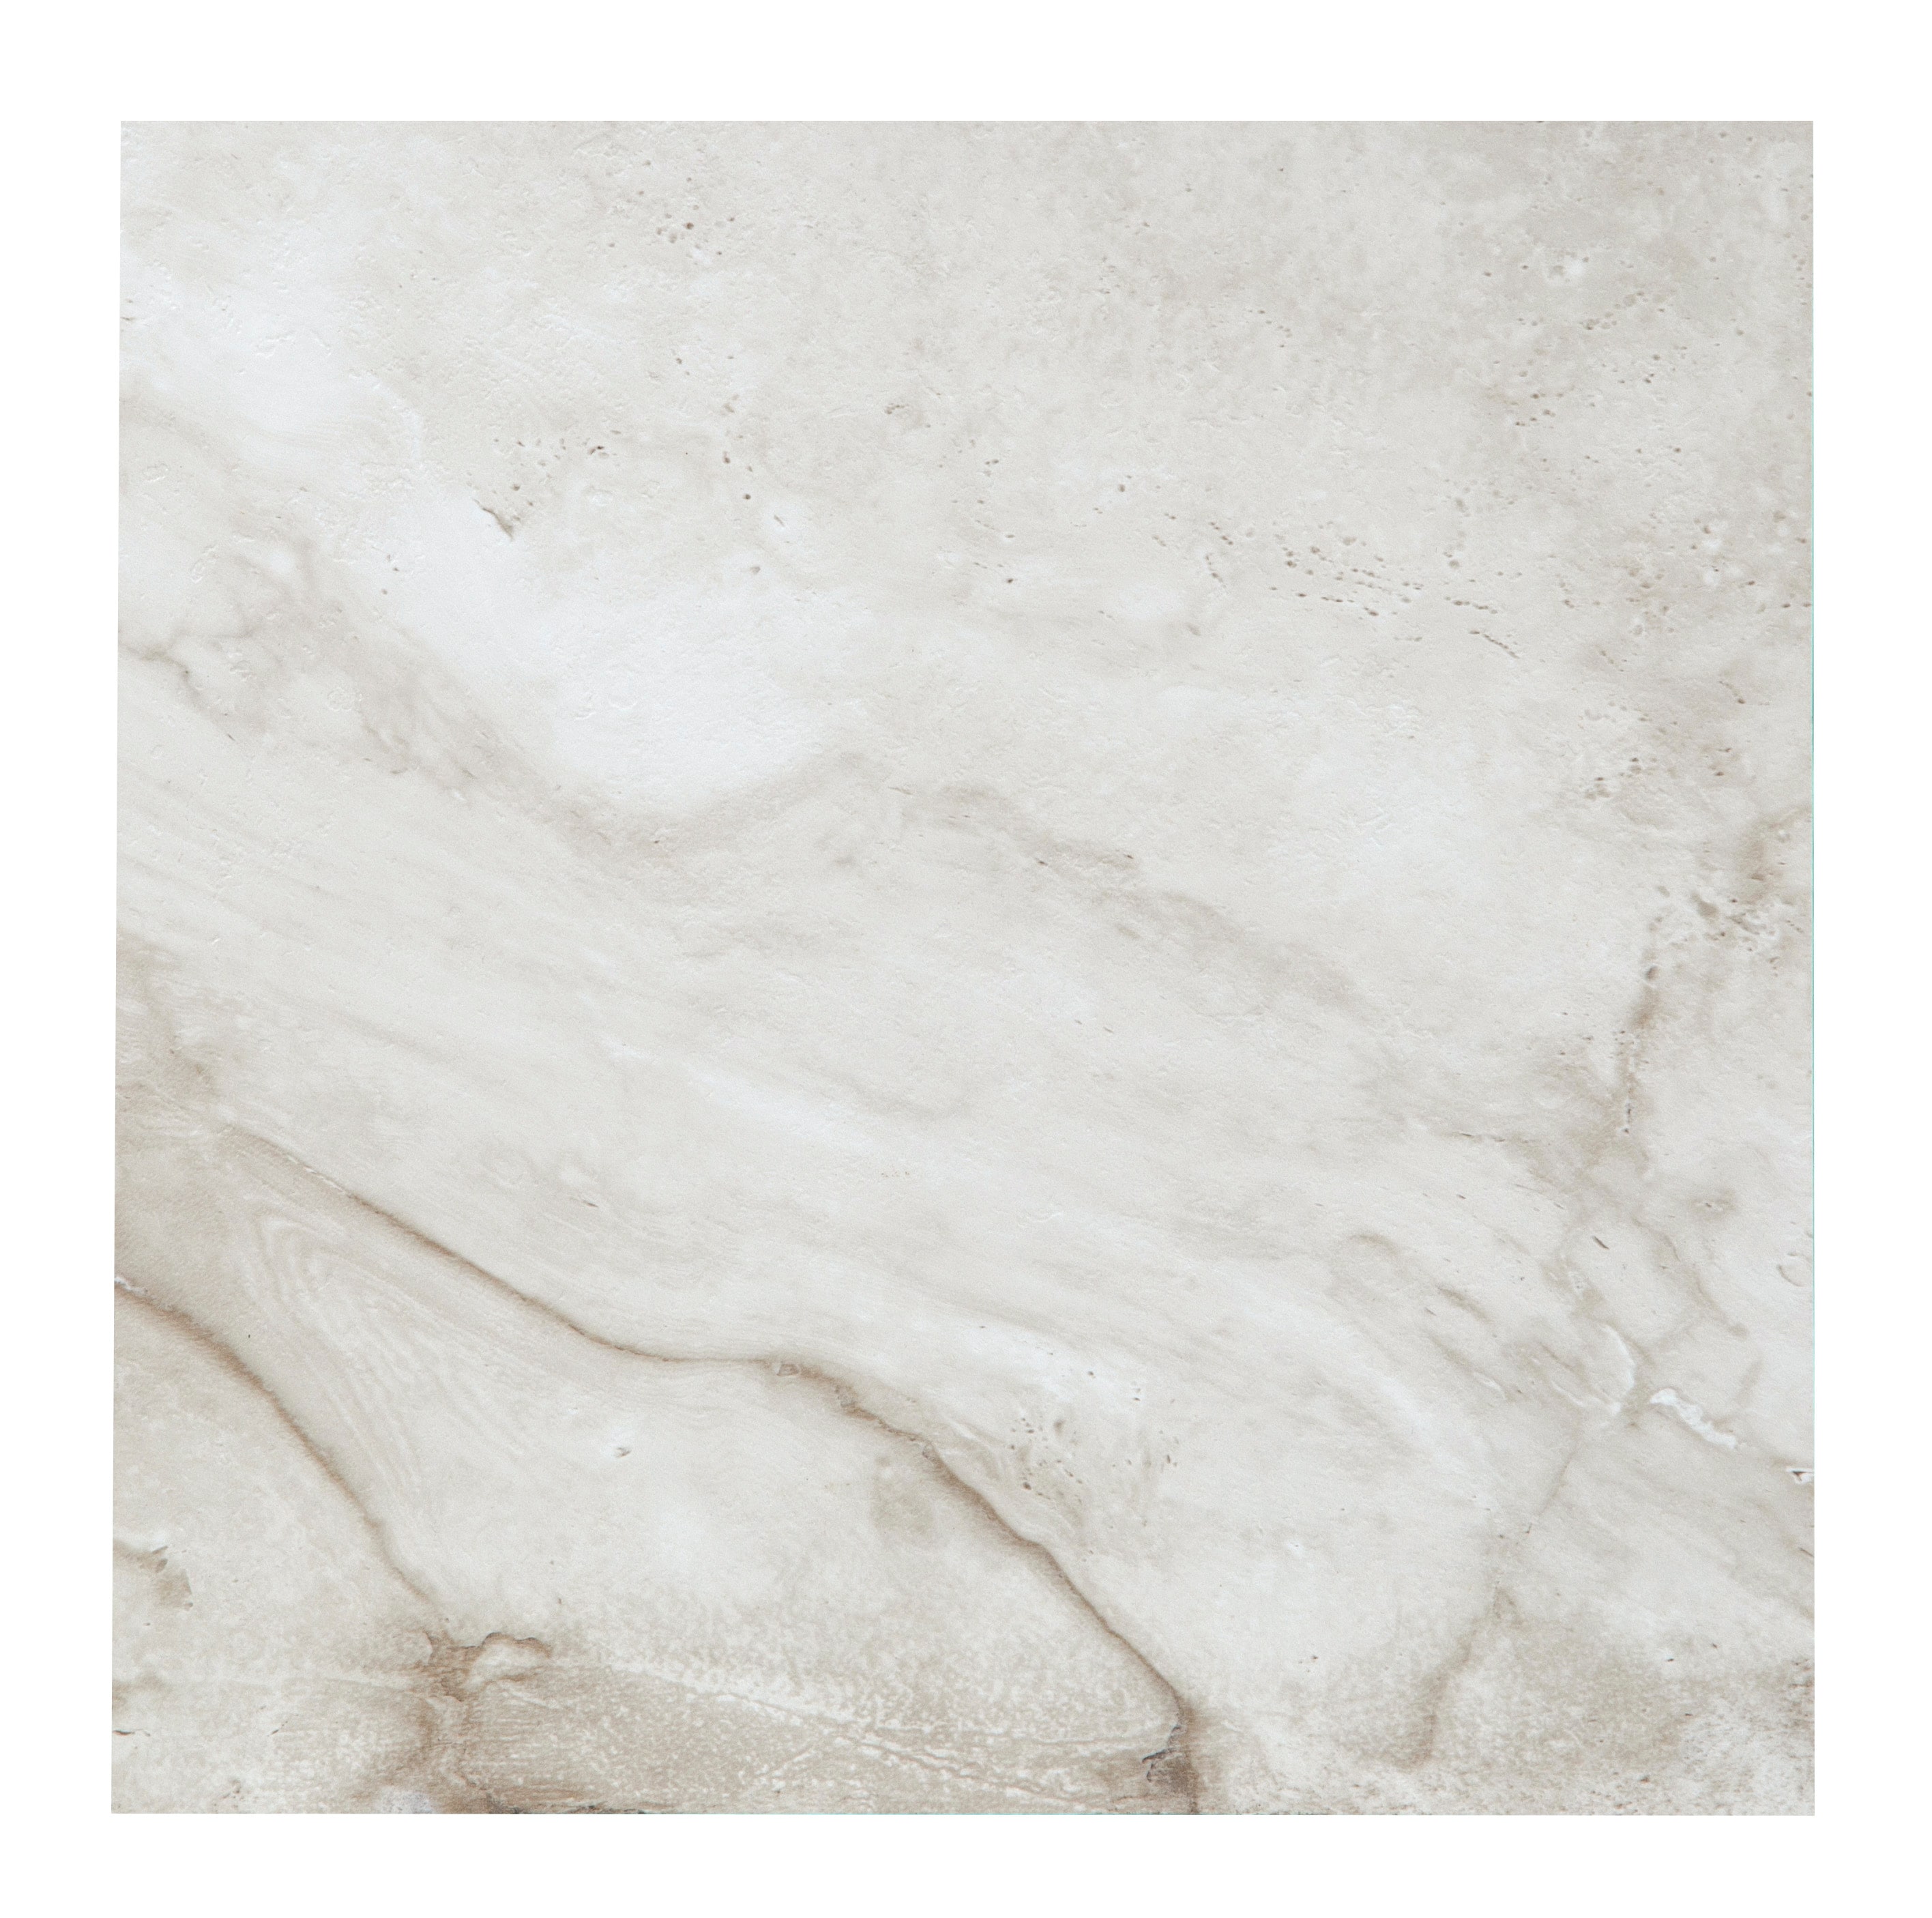 These stone tiles look may like marble but they're entirely made of fi